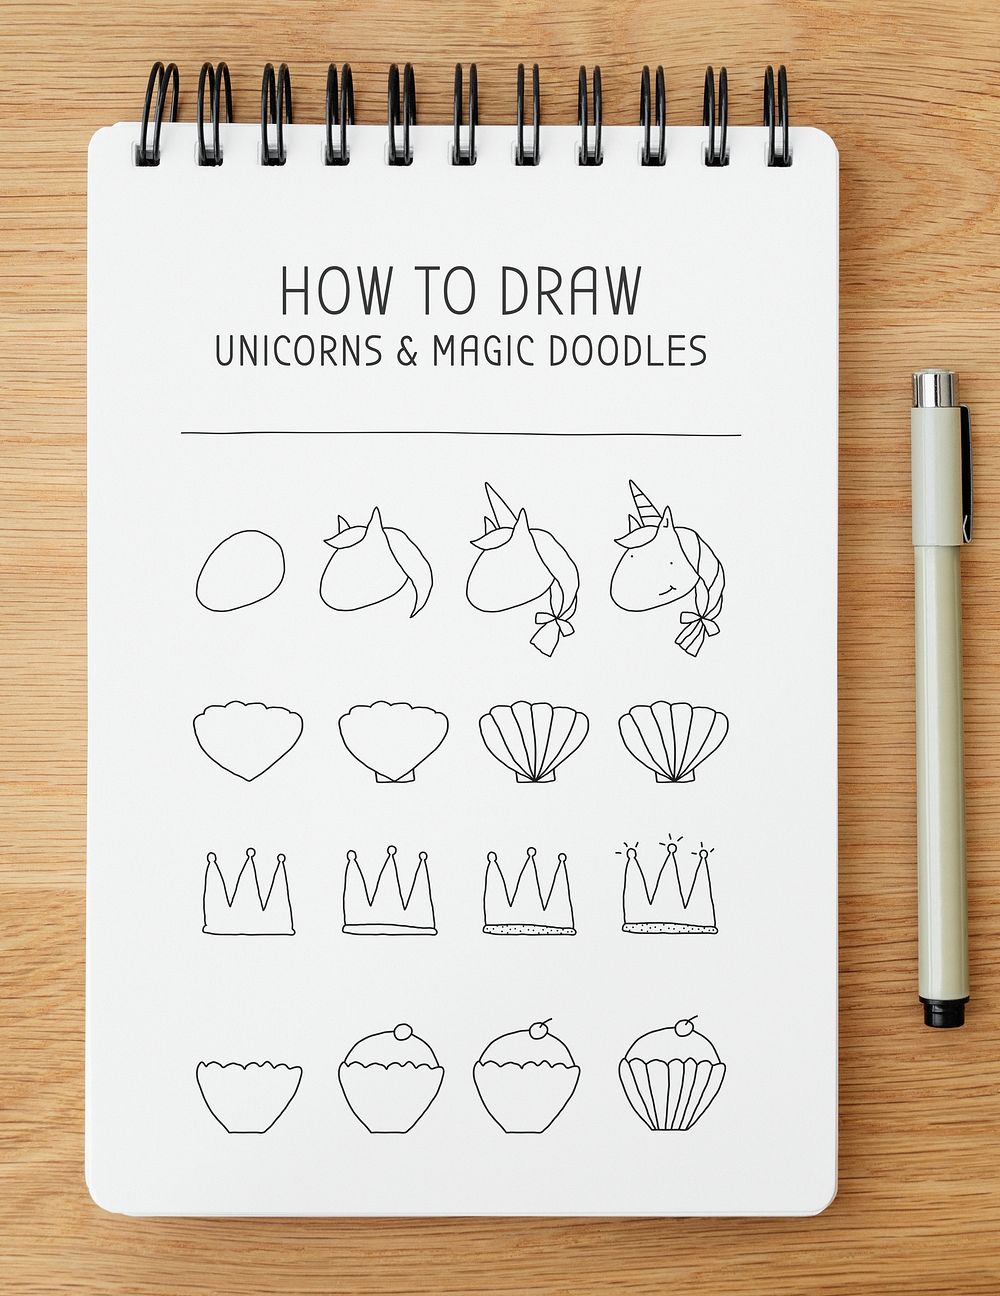 How to draw unicorns and magic doodles tutorial on a white paper mockup